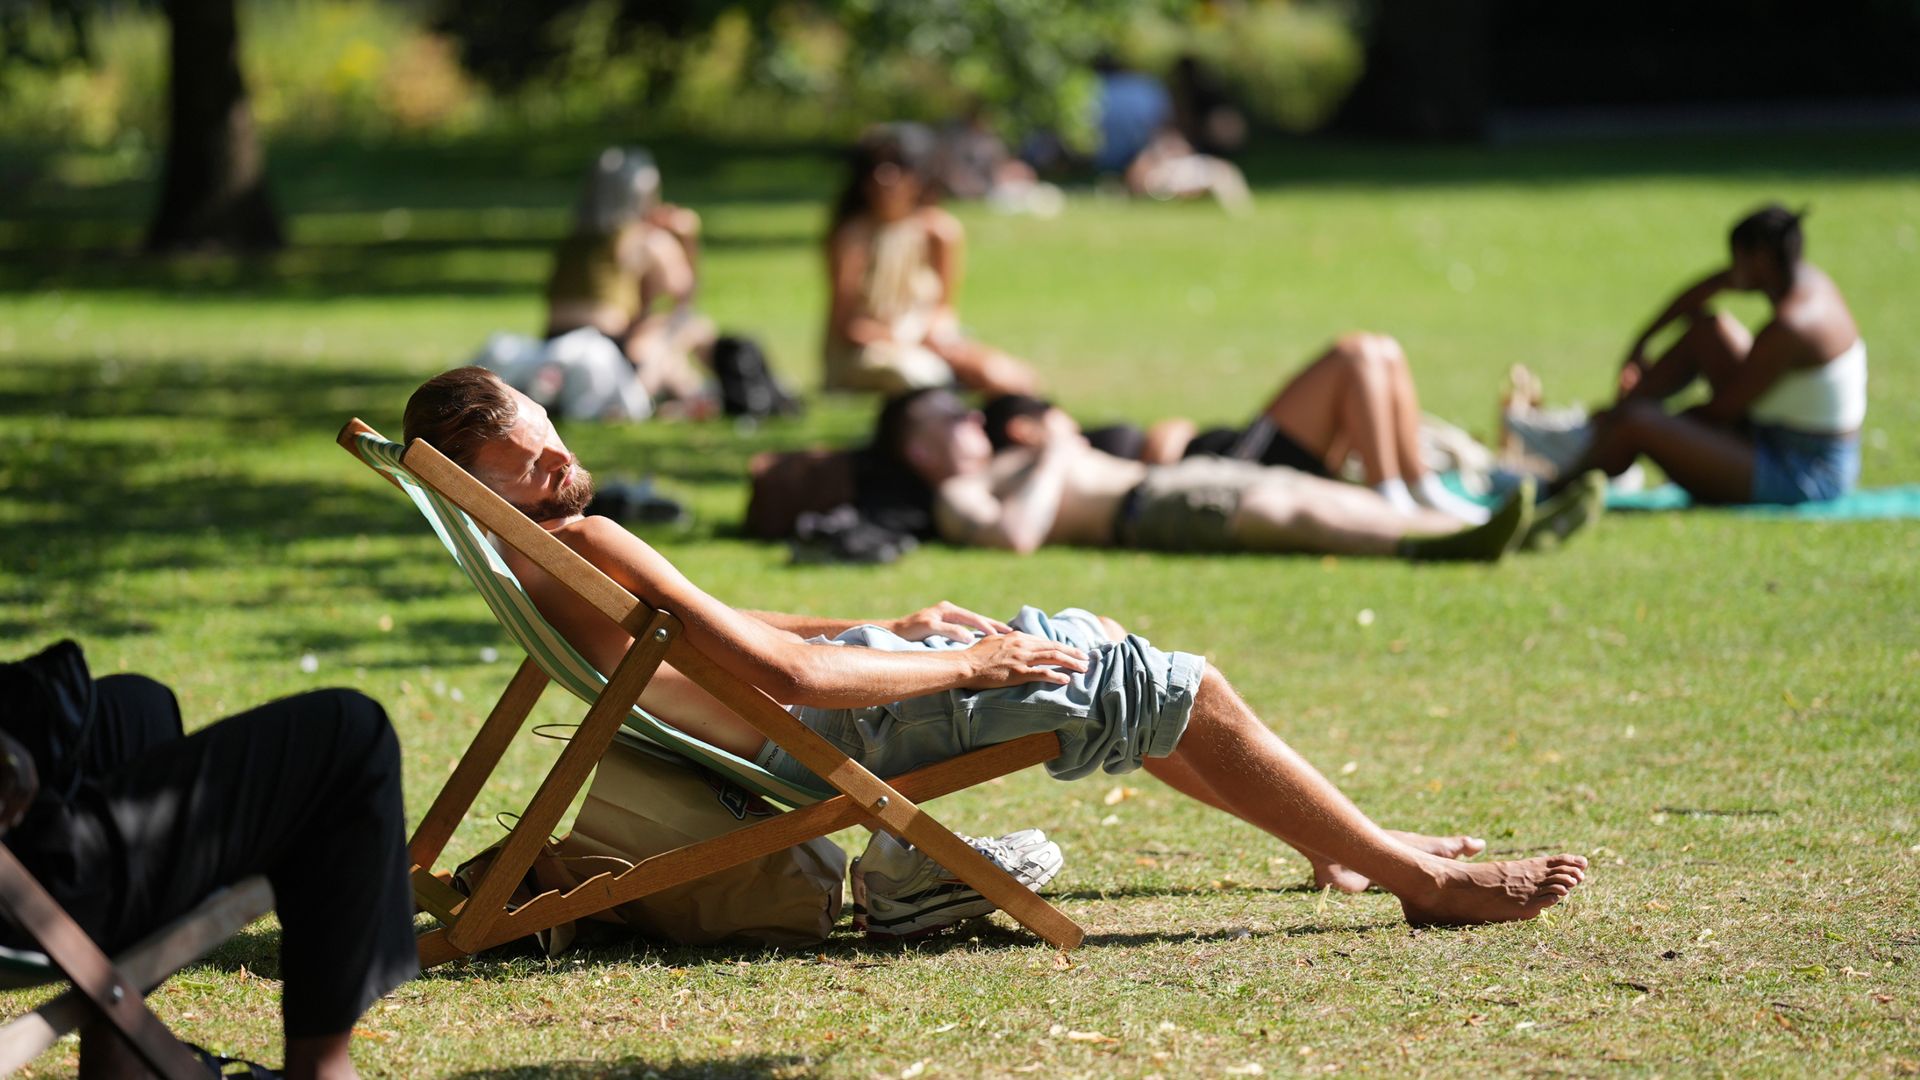 Hottest day of the year expected with temperatures set to surpass 30C